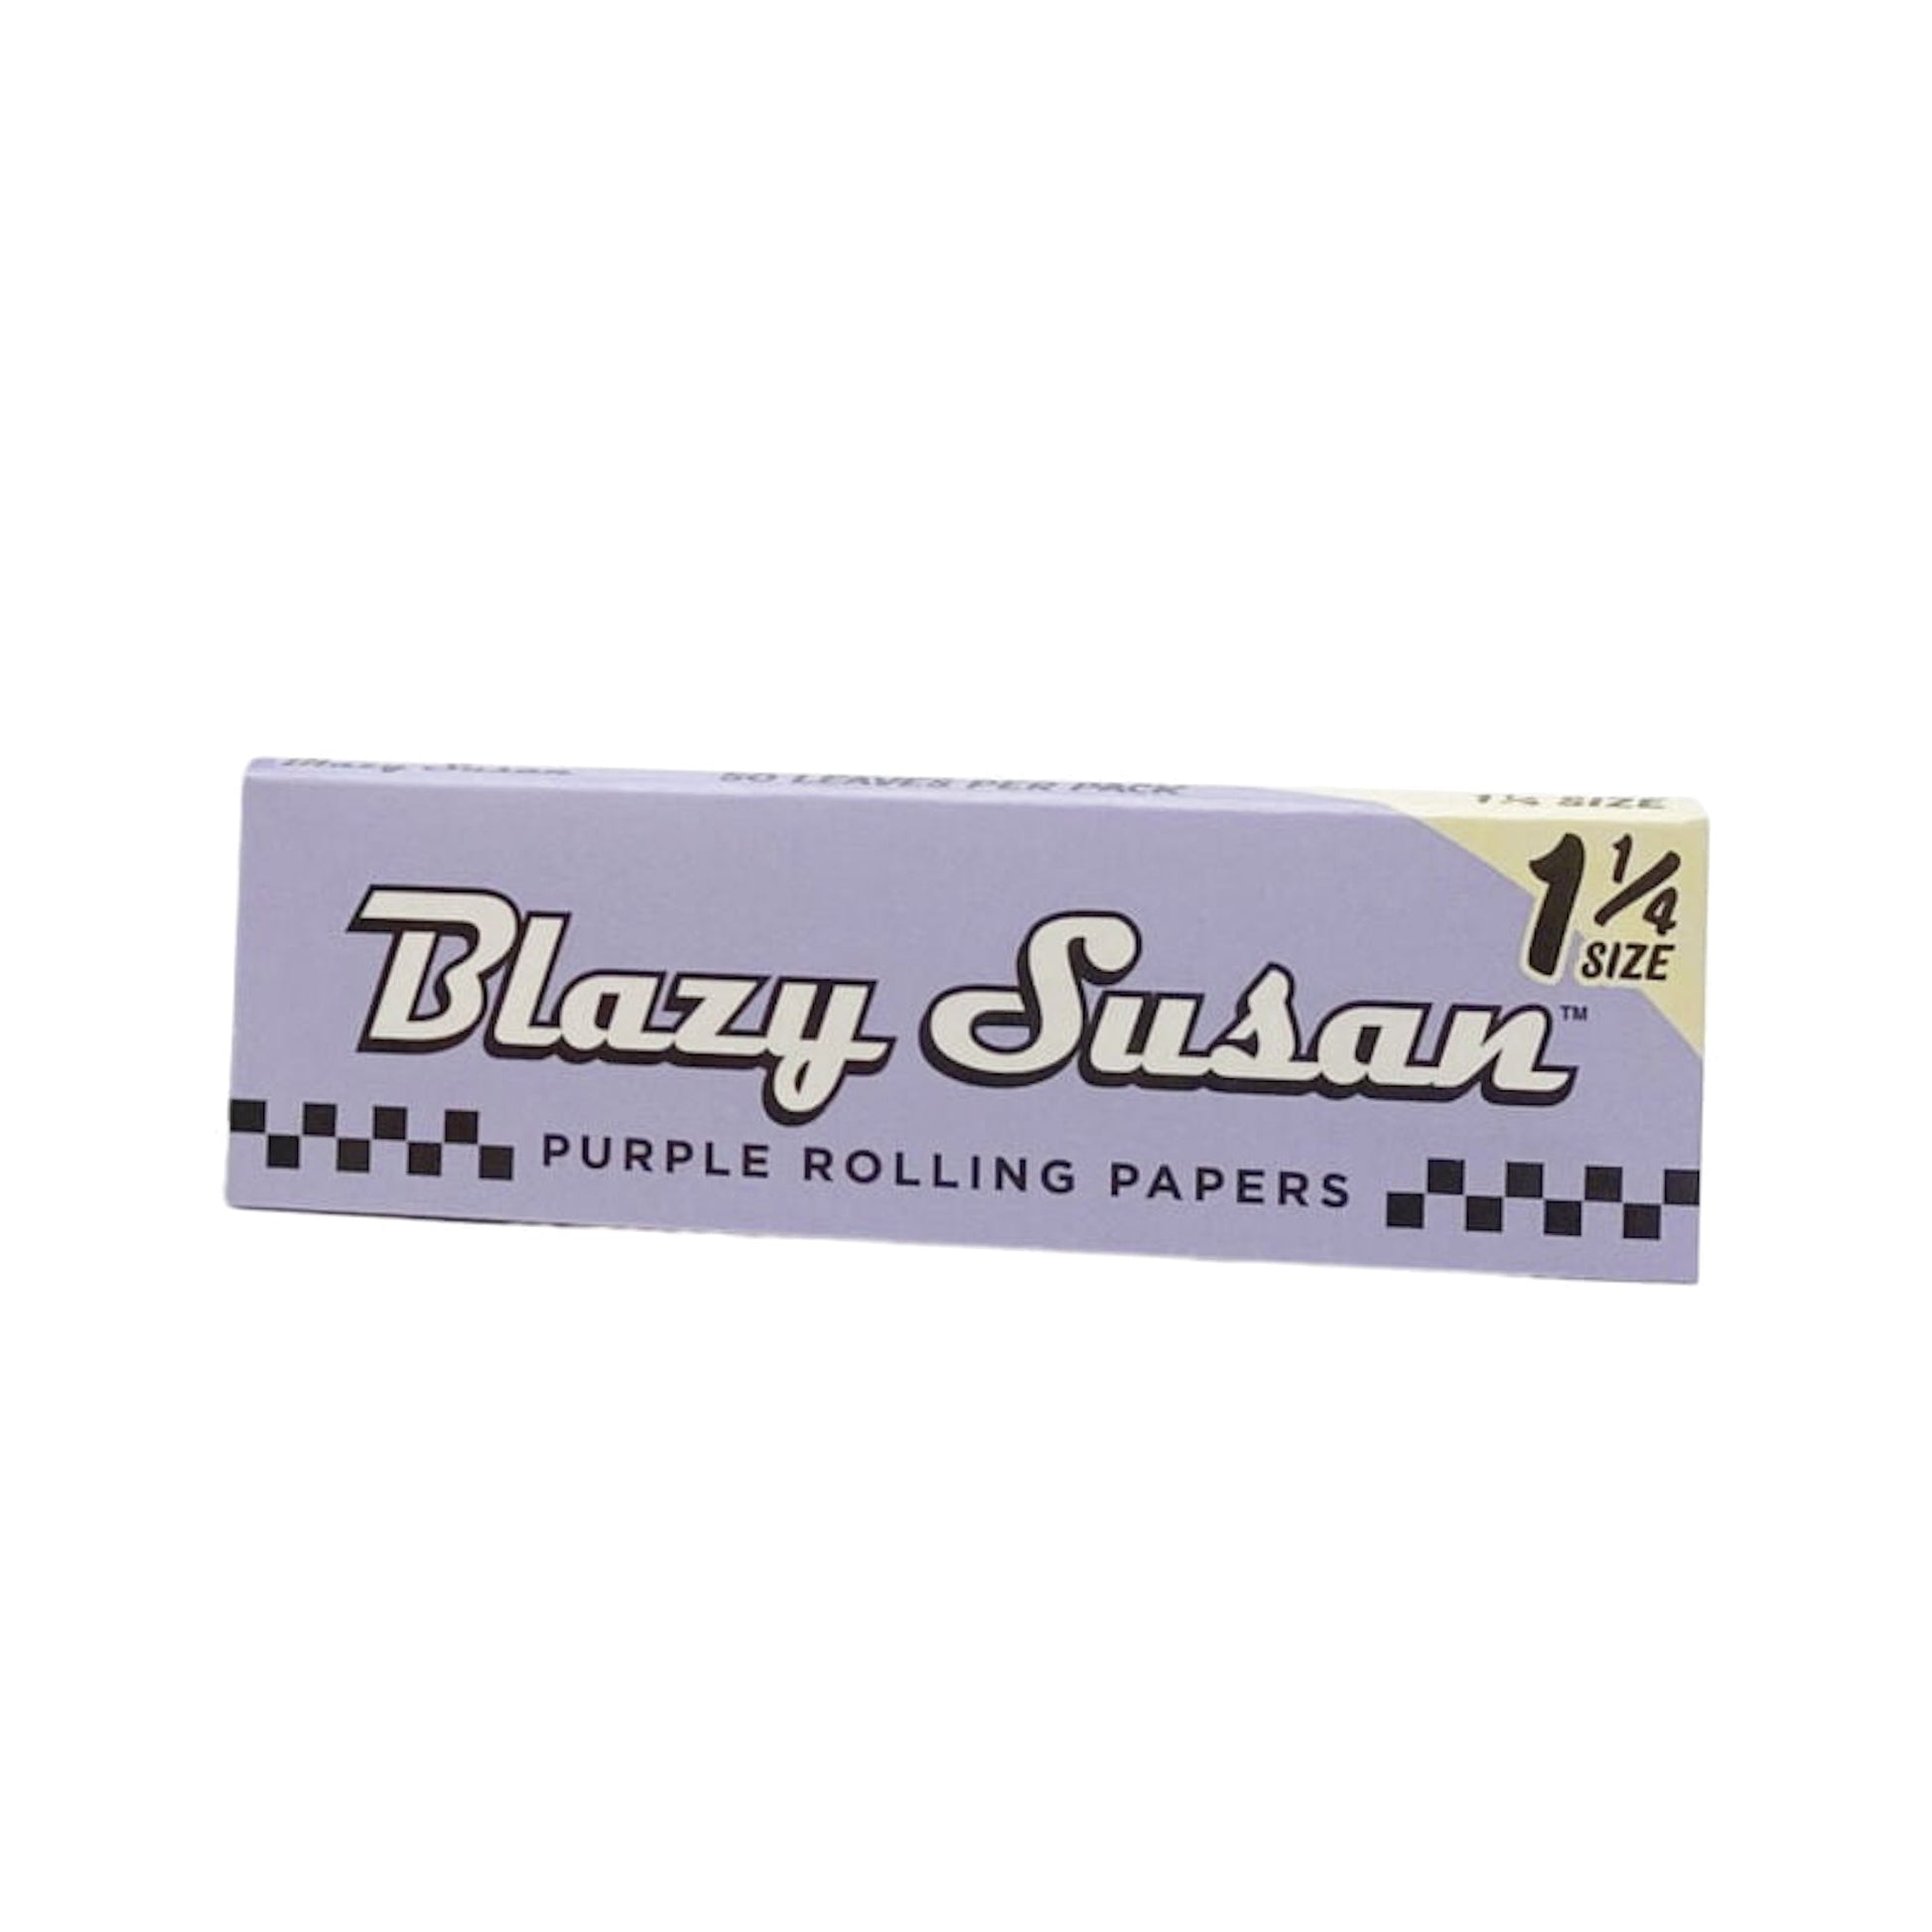 Blazy Susan Purple Rolling Papers - 2 Pack 1 1/4